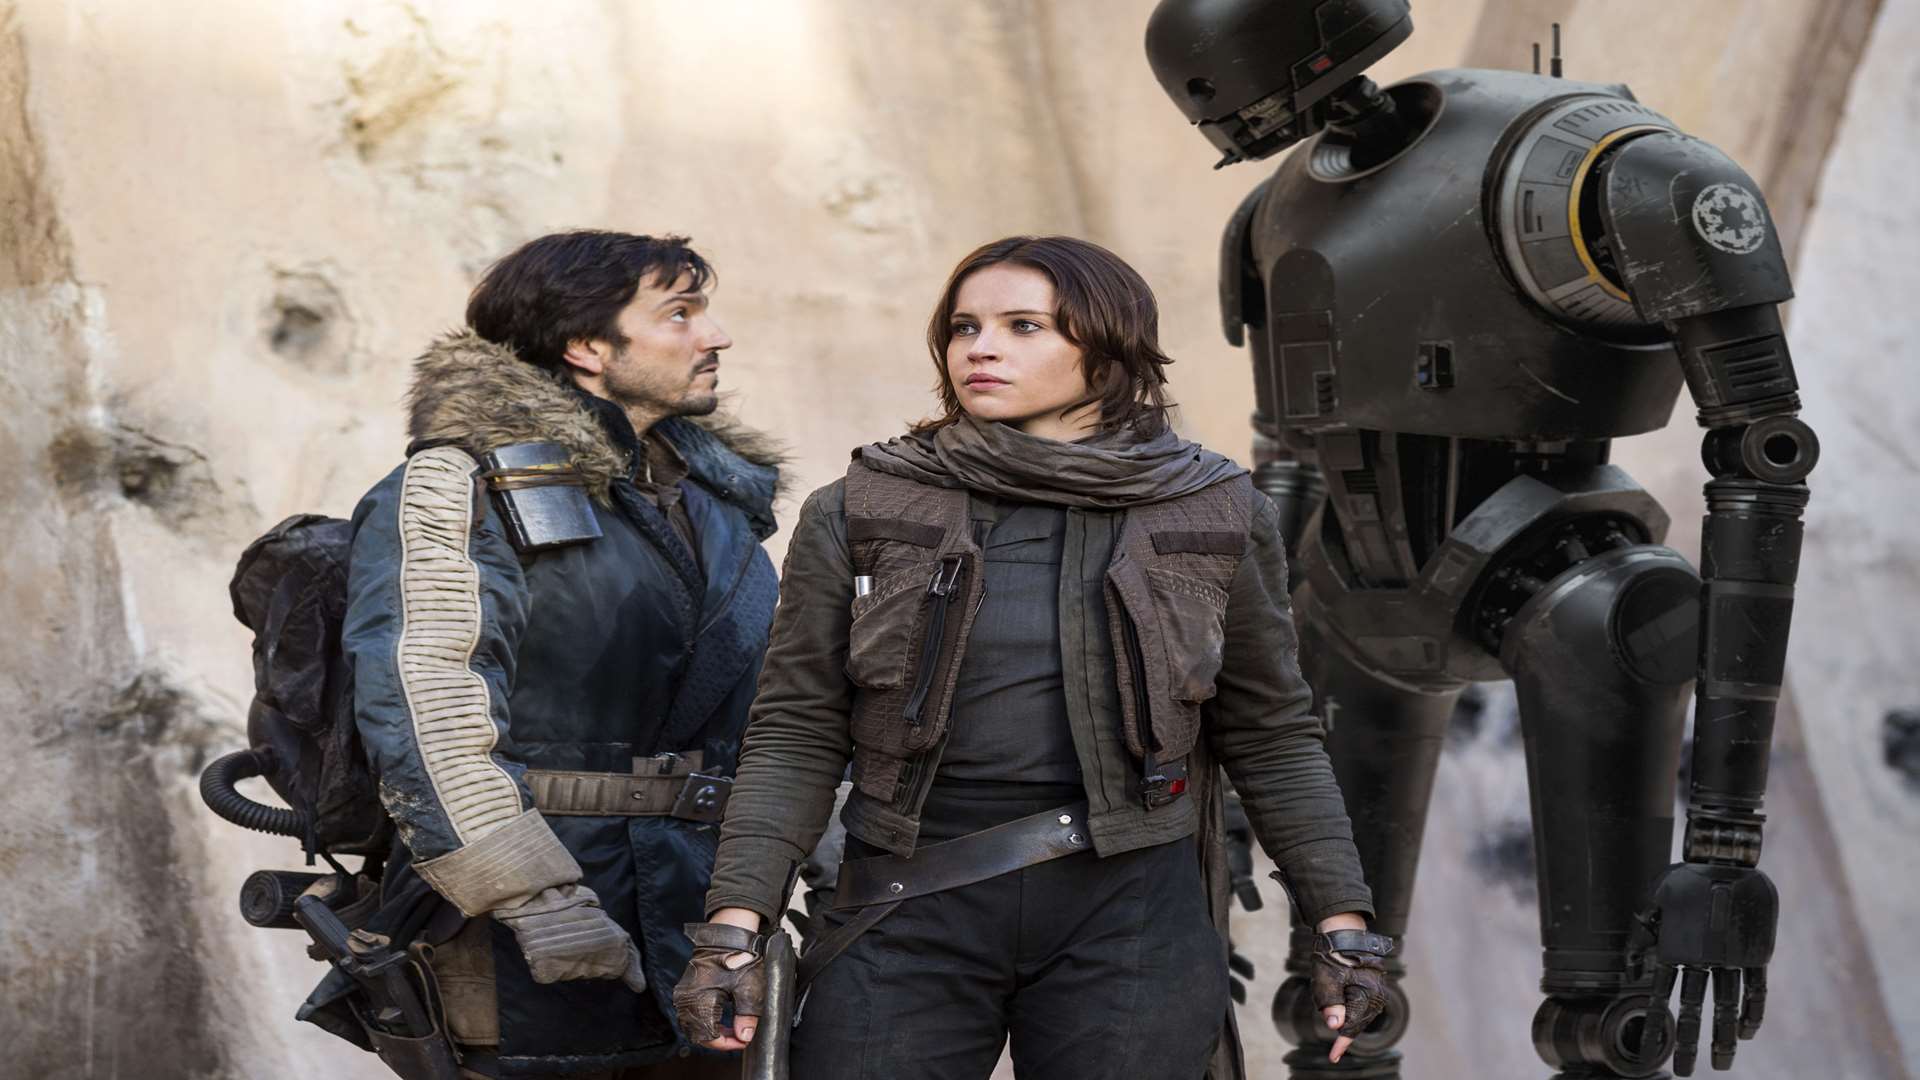 Extract from the movie Rogue One: A Star Wars Story